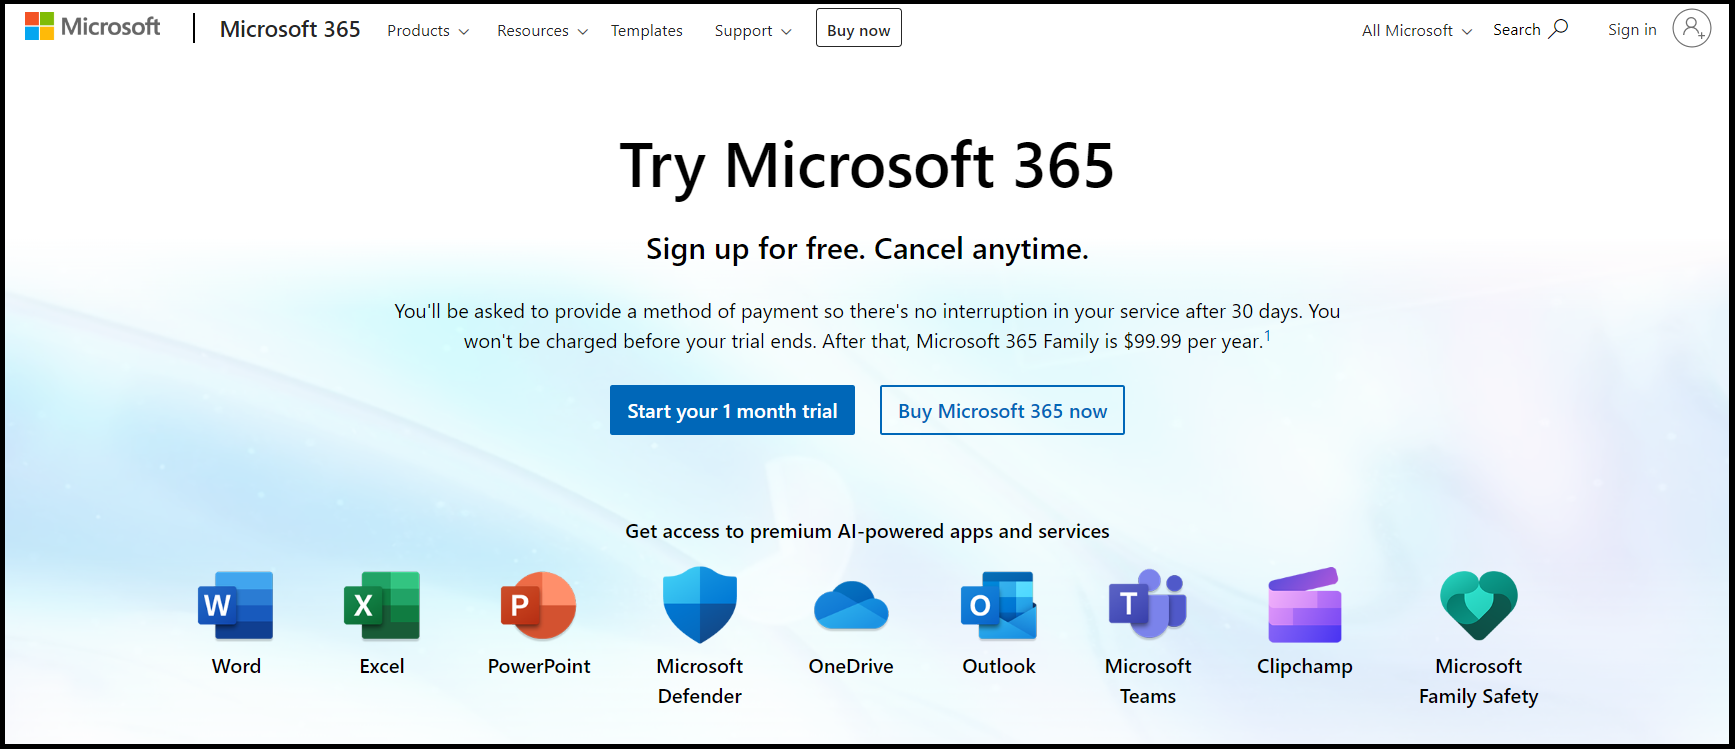 The Microsoft landing page with a free one-month trial for Microsoft 365